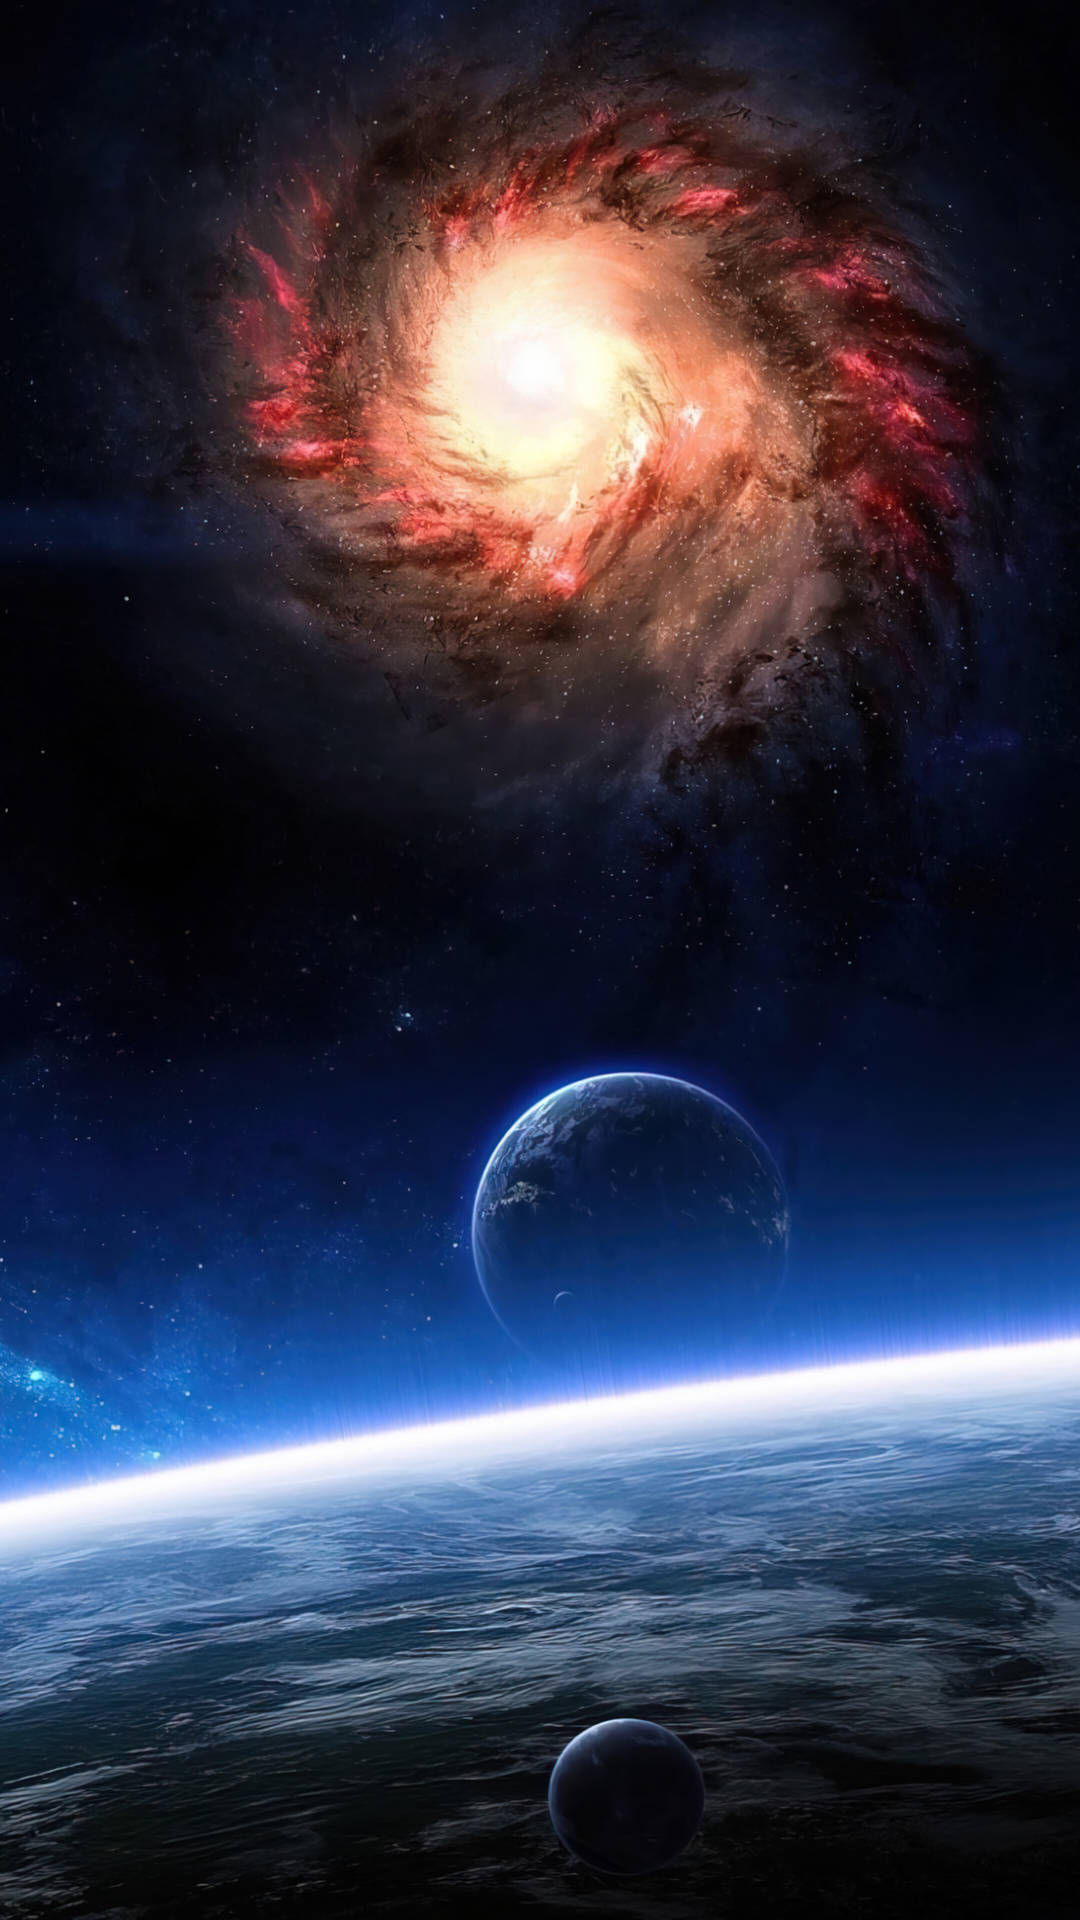 Galaxy Overlooking Planets In Space 4k Phone Wallpaper